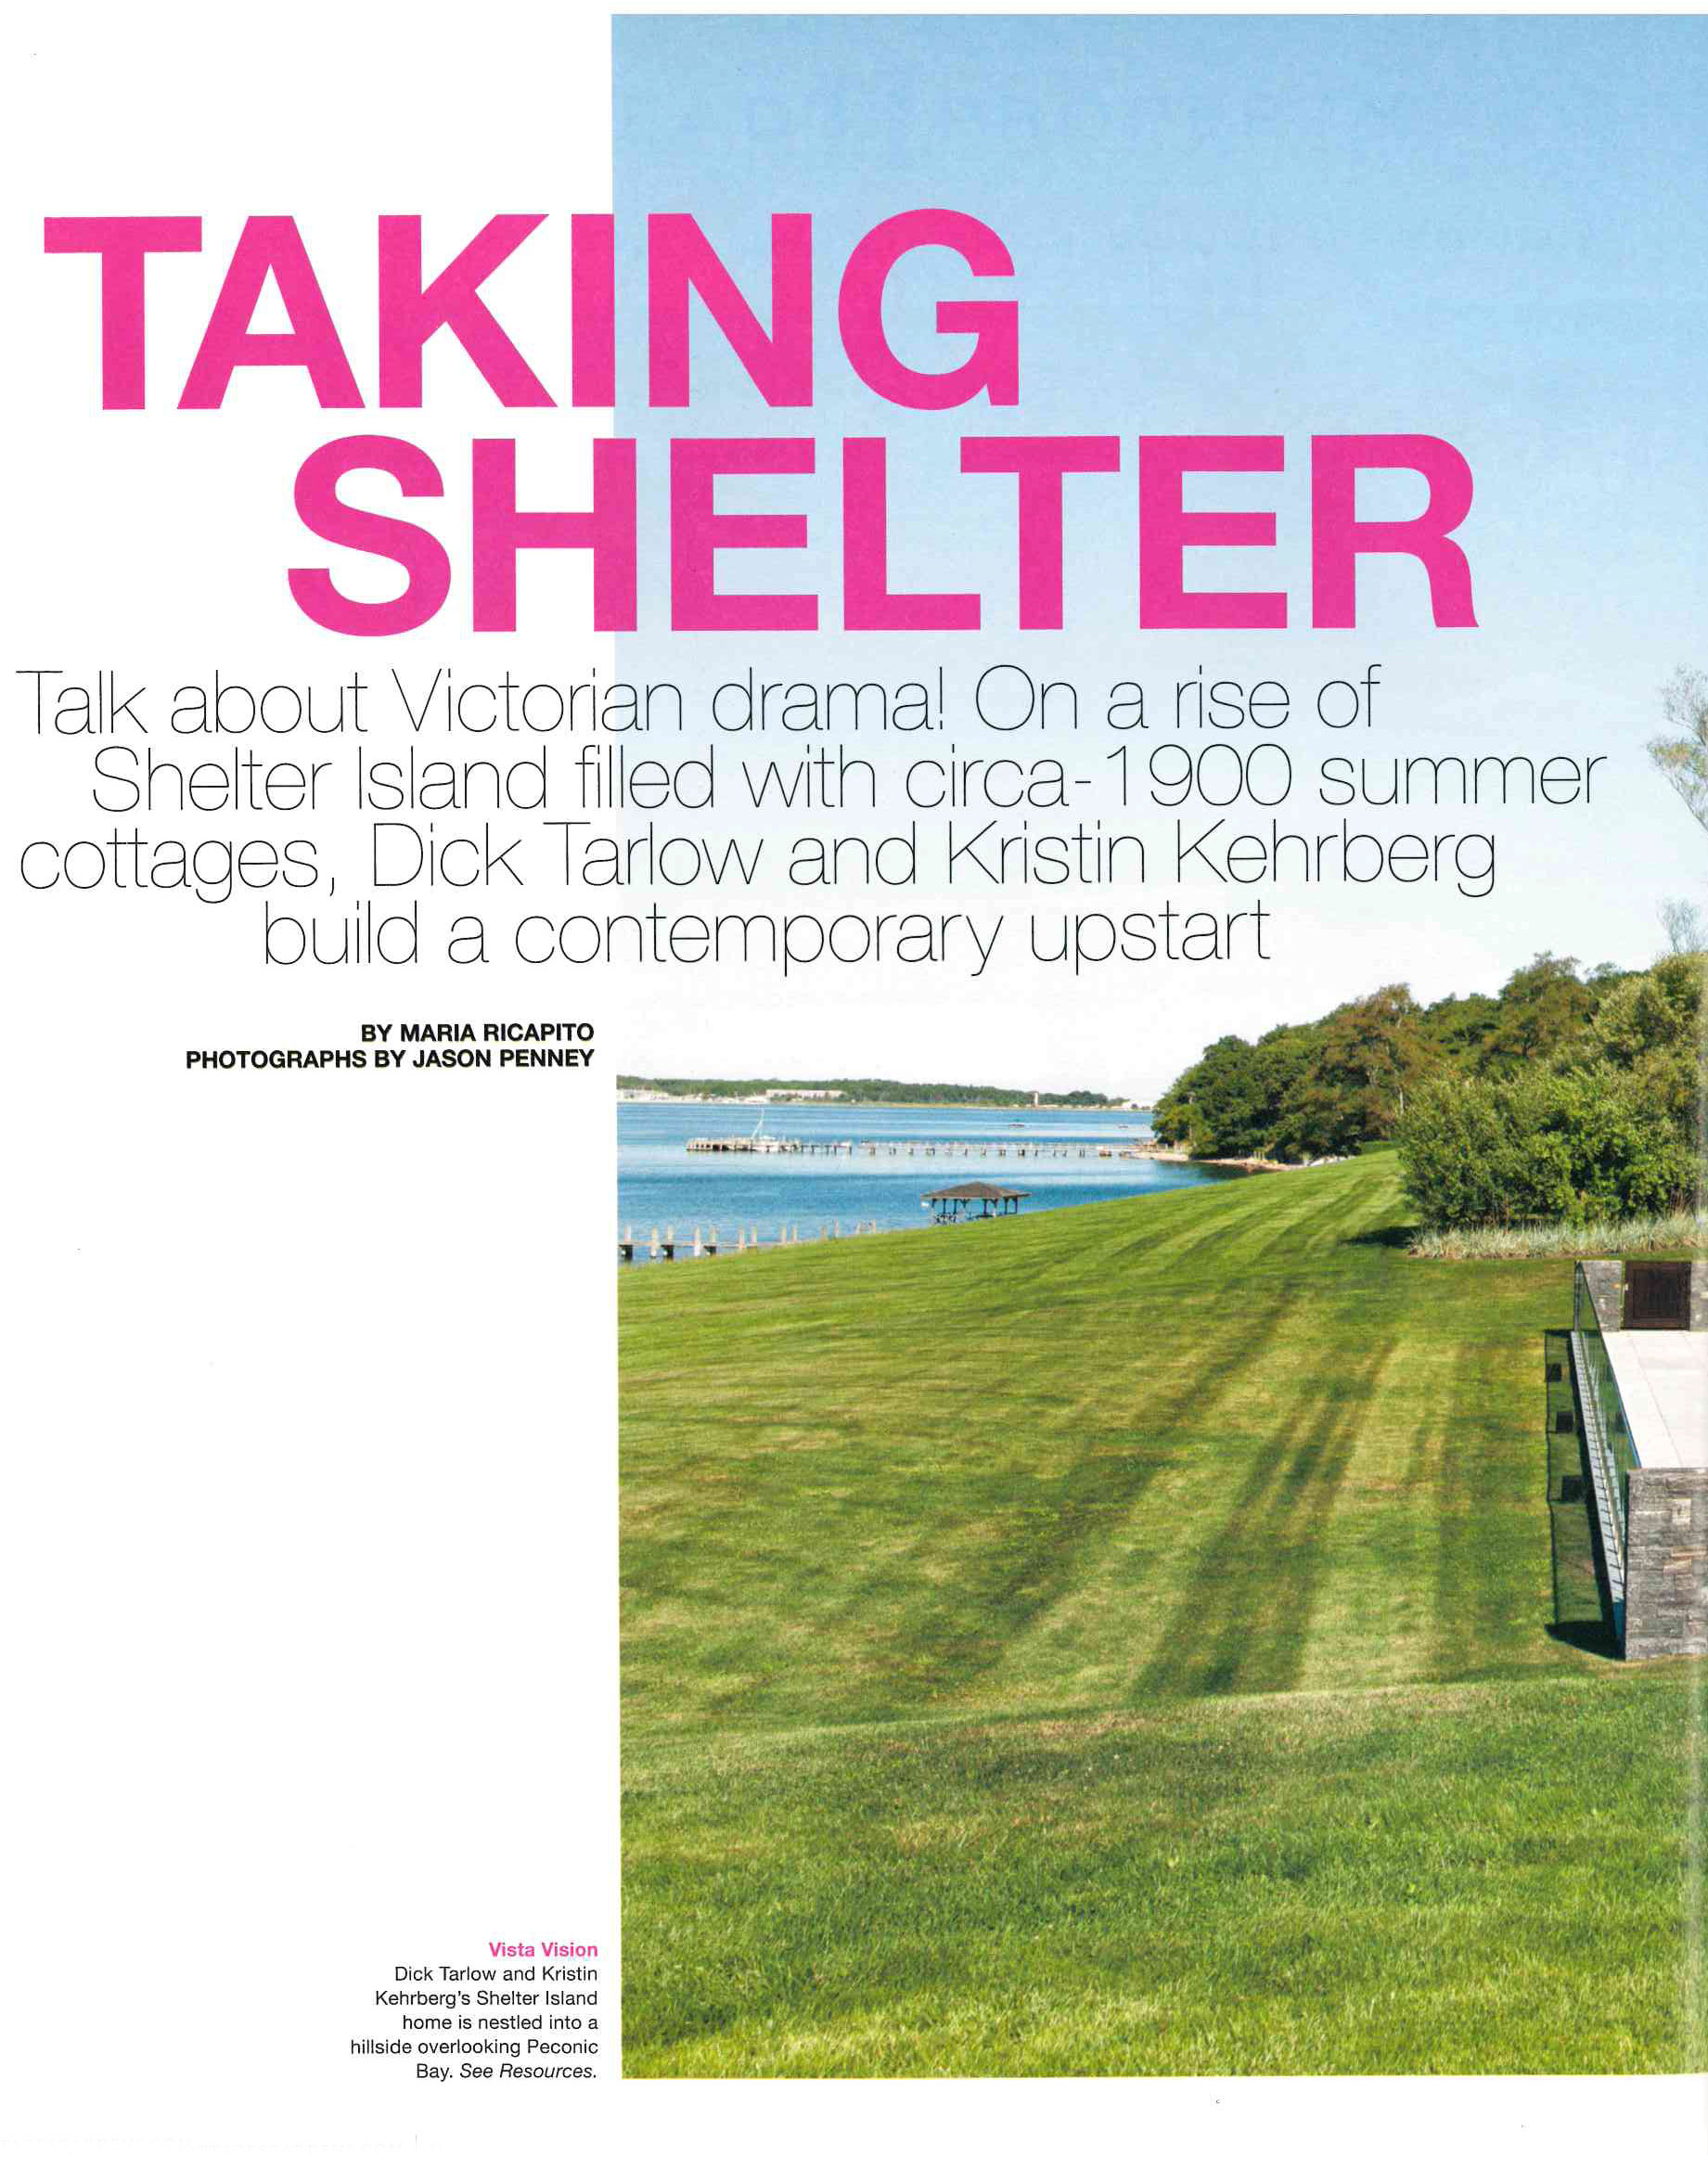 Hamptons Cottages and Gardens, July 1, 2016, Taking Shelter article page 1